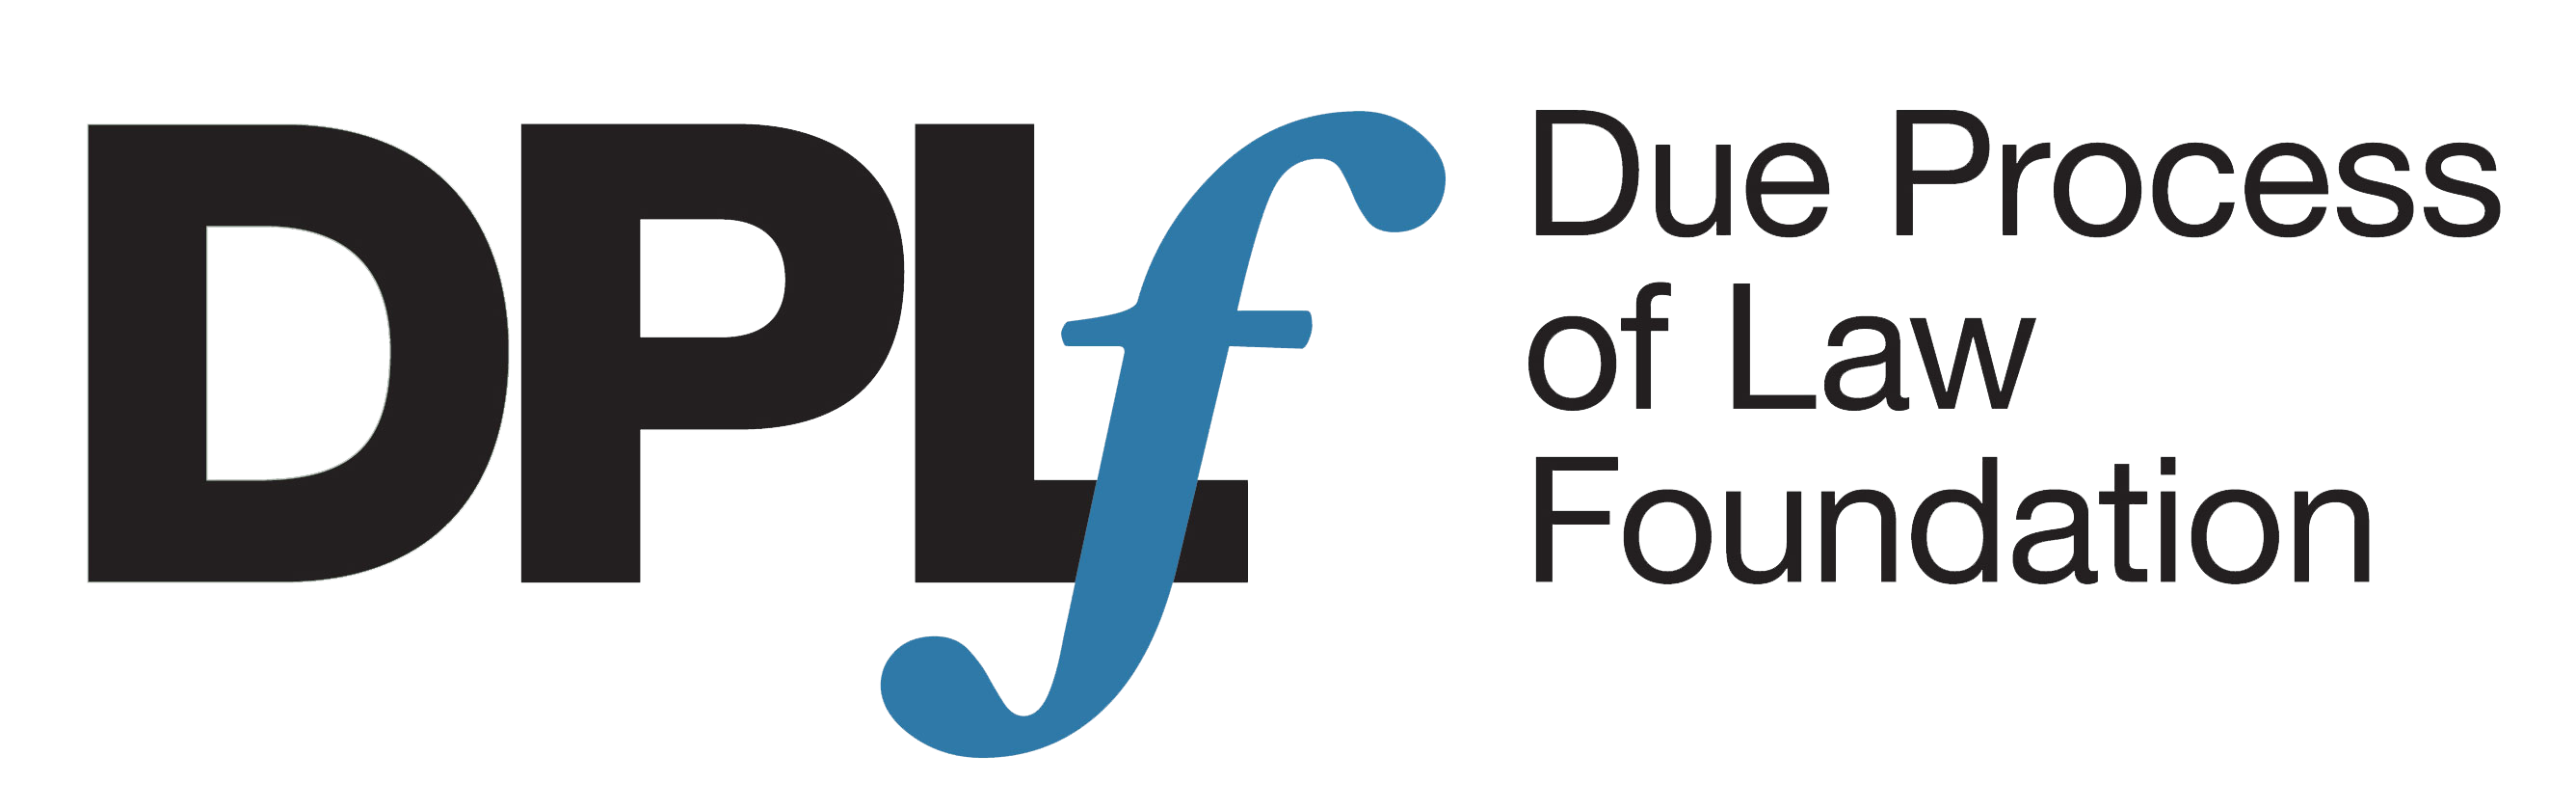 Due Process of Law Foundation logo